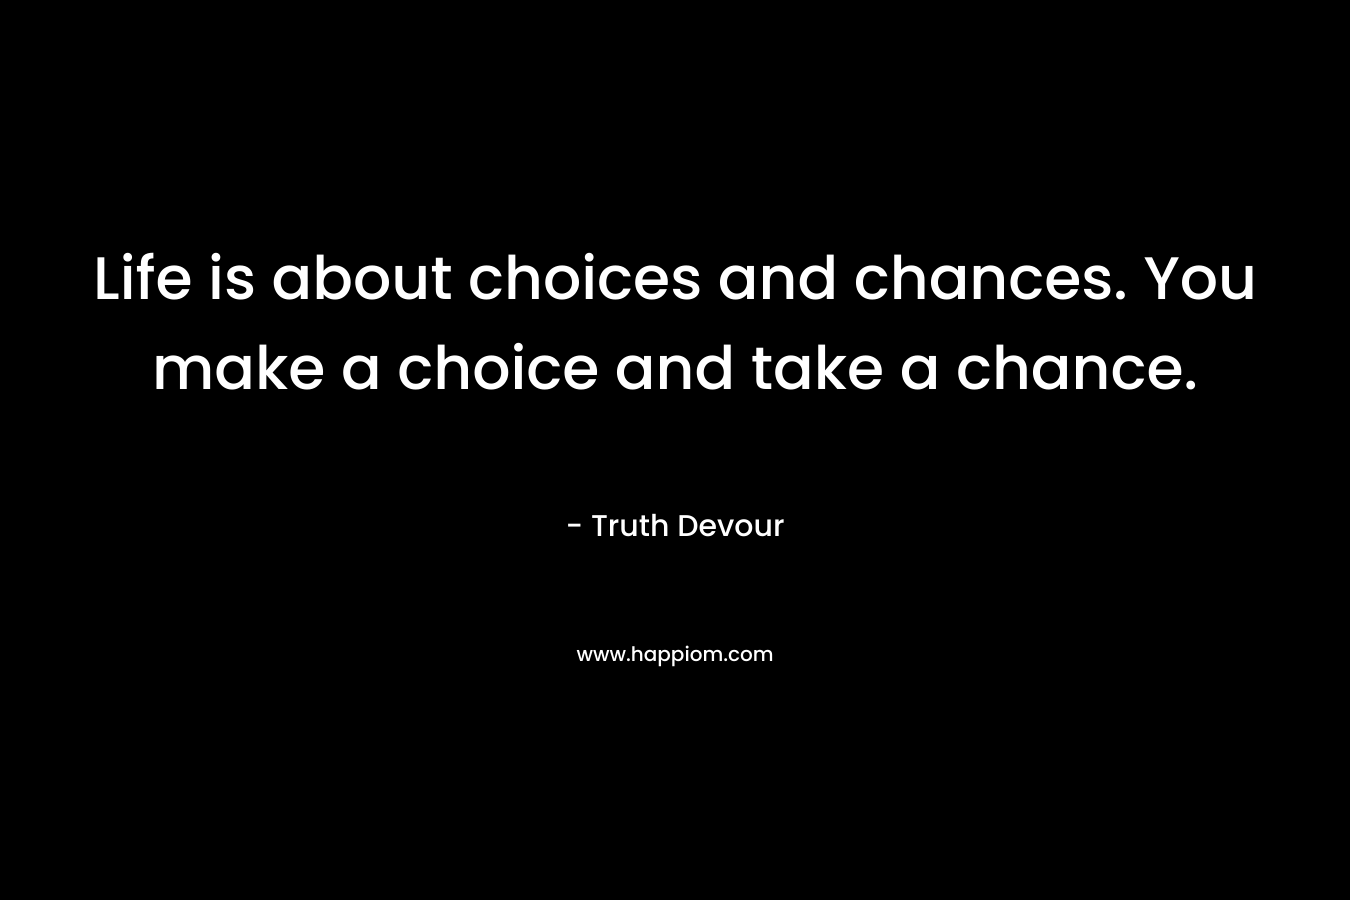 Life is about choices and chances. You make a choice and take a chance.